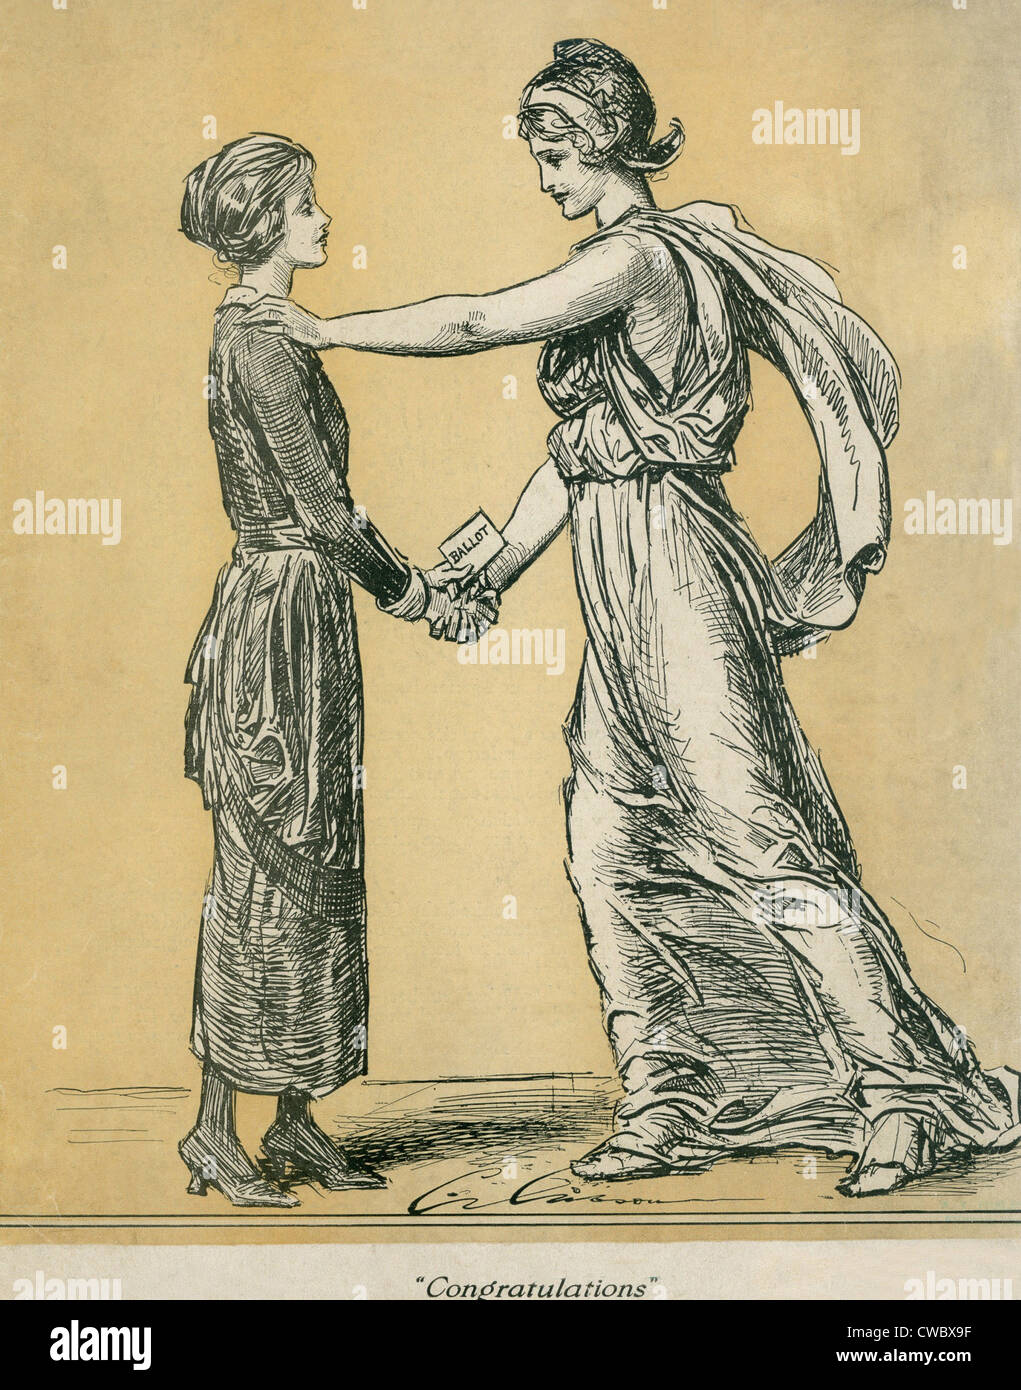 Magazine cover commemorating the final ratification of the 19th amendment granting women the right to vote. LIFE magazine, June Stock Photo